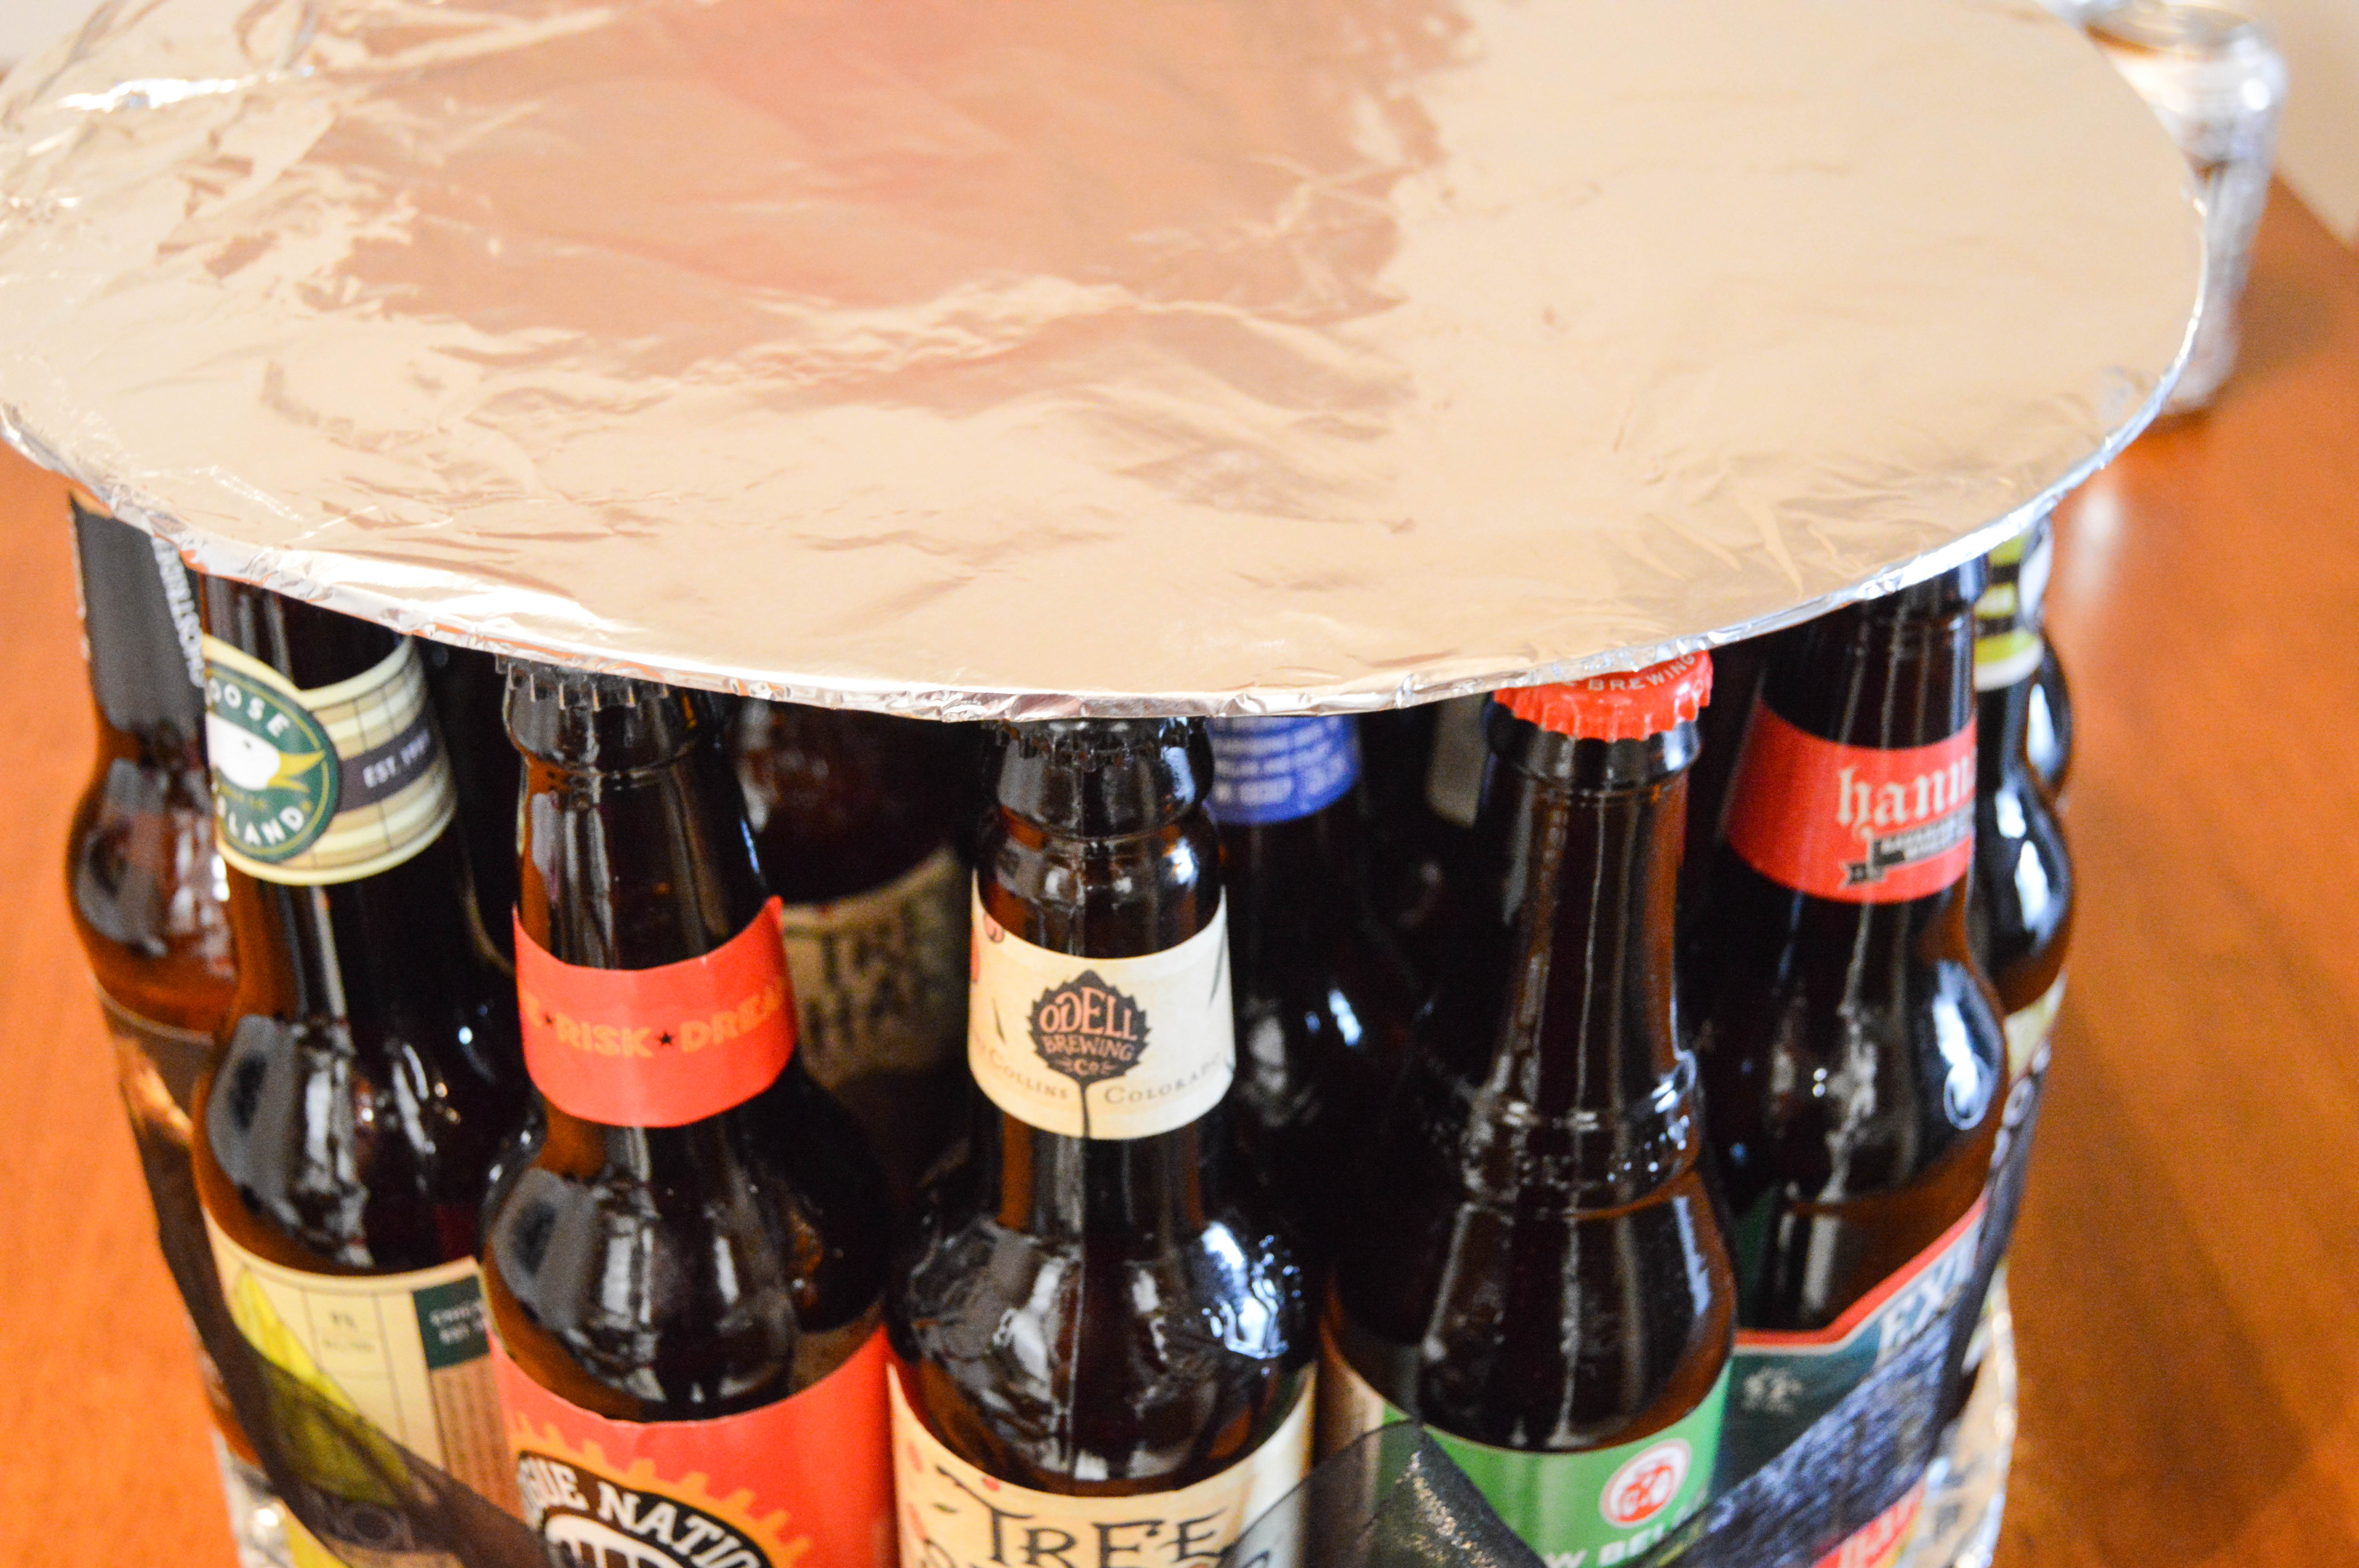 How To Make Birthday Cake With Beer Bottles | topqa.info